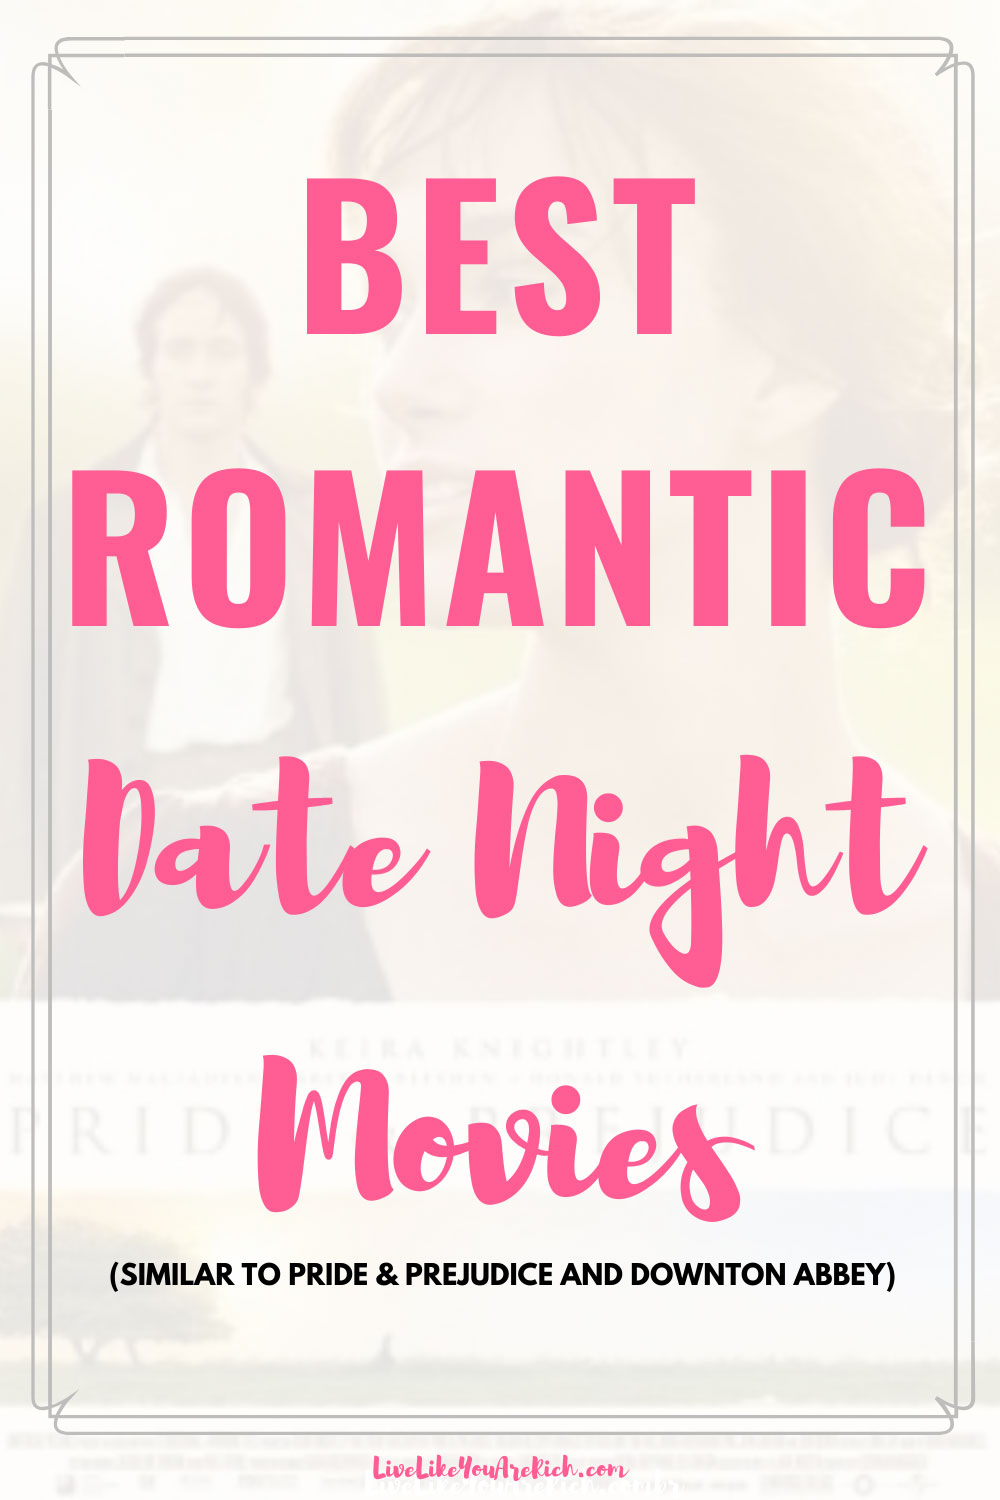 I love romantic period classic films and TV shows. Especially those with good acting, that are well written, and historically accurate. Pride and Prejudice and Downton Abbey have been extremely popular. For those wishing to find more, I’ve created this list of similar productions. #livelikeyouarerich #romanticmovies #downtonabbey